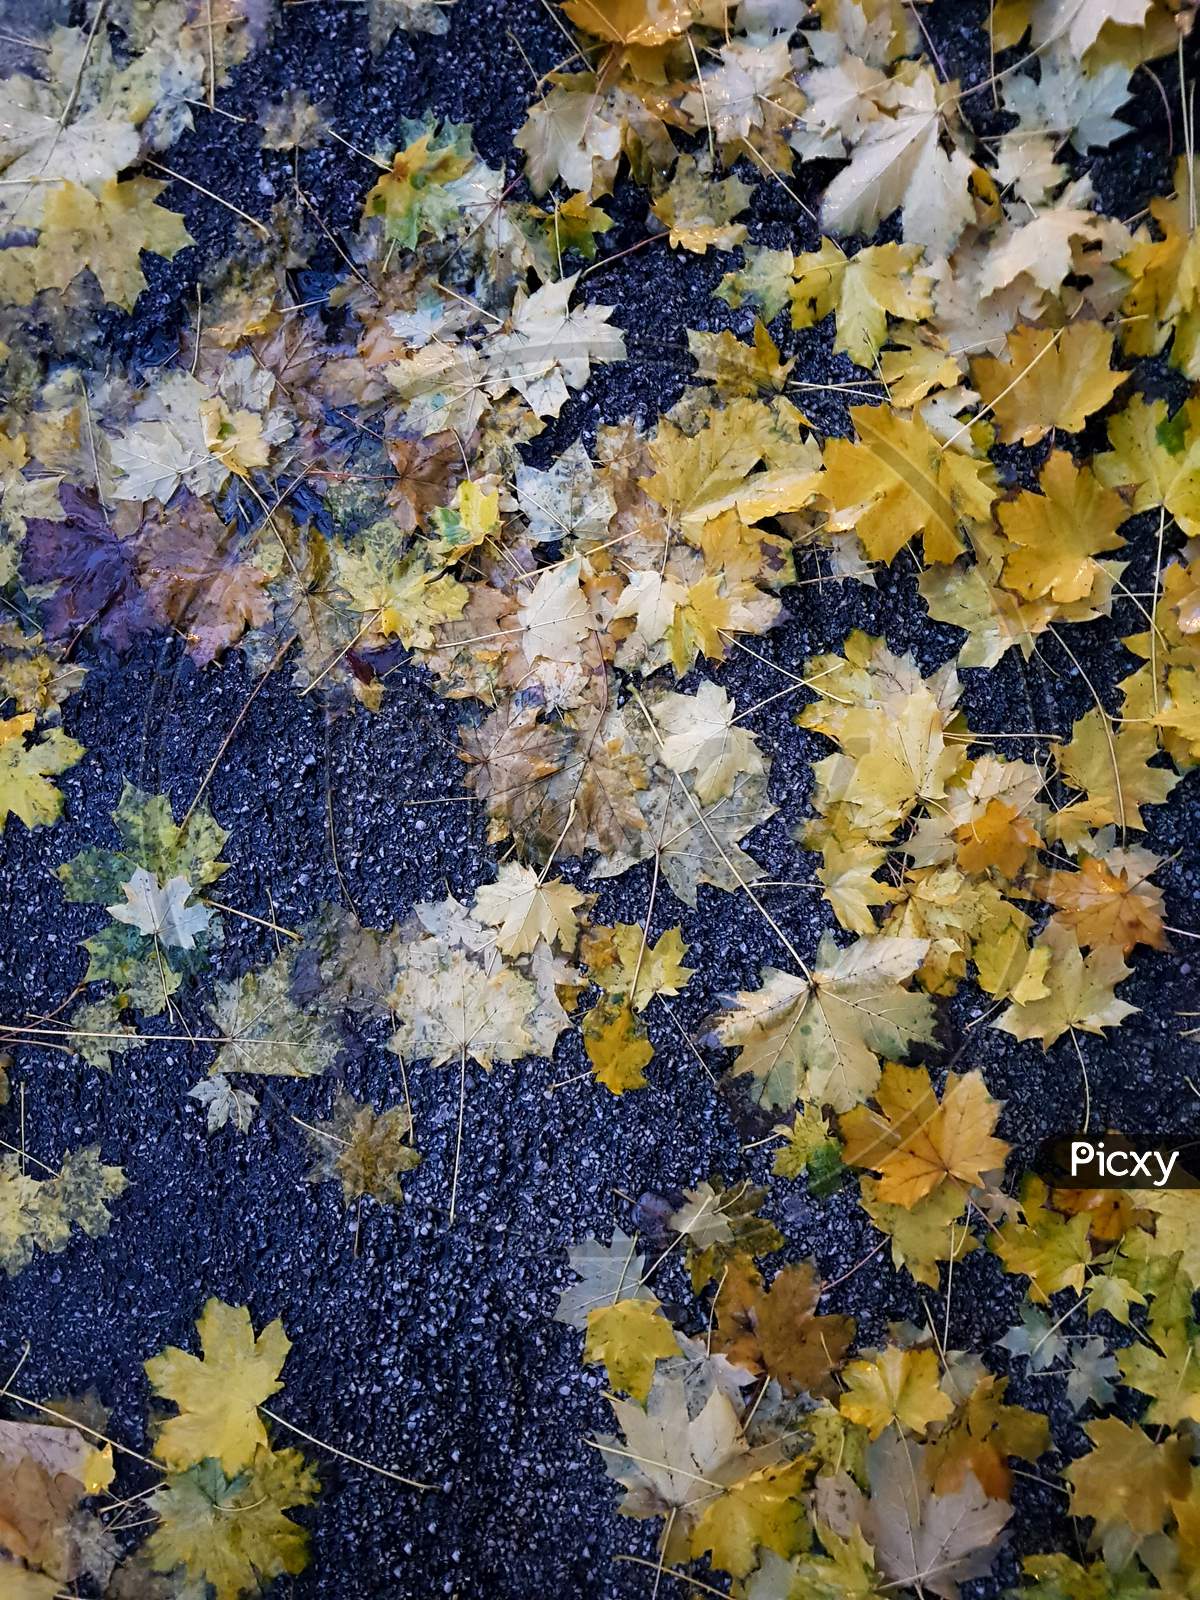 Wet Fallen Leaves On A Pavement